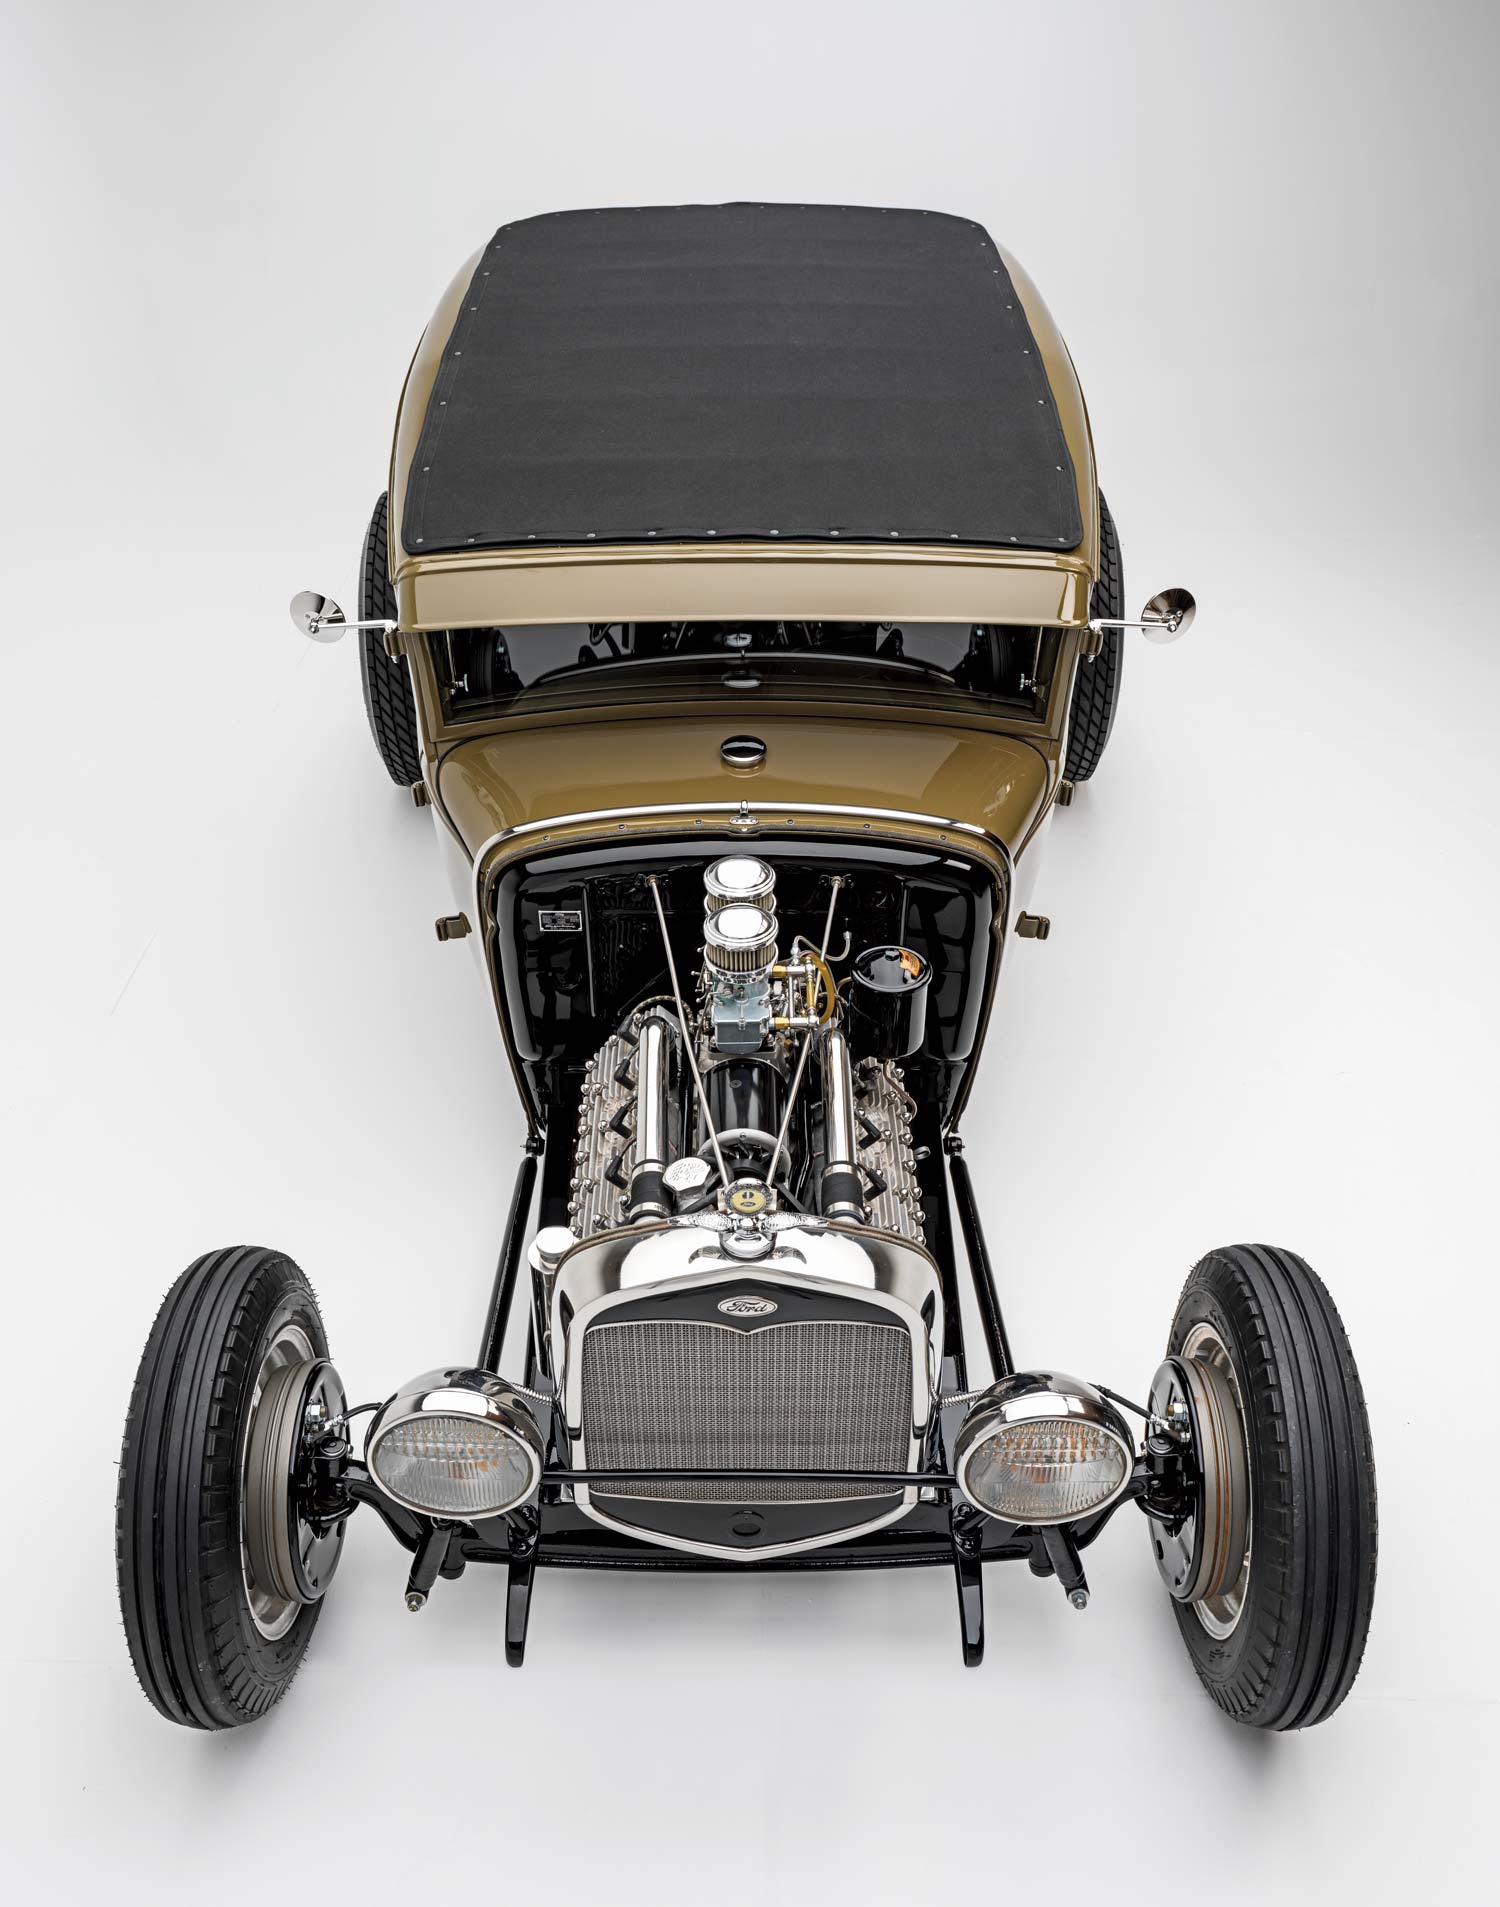 Front top view of the - ’31 Ford Sedan